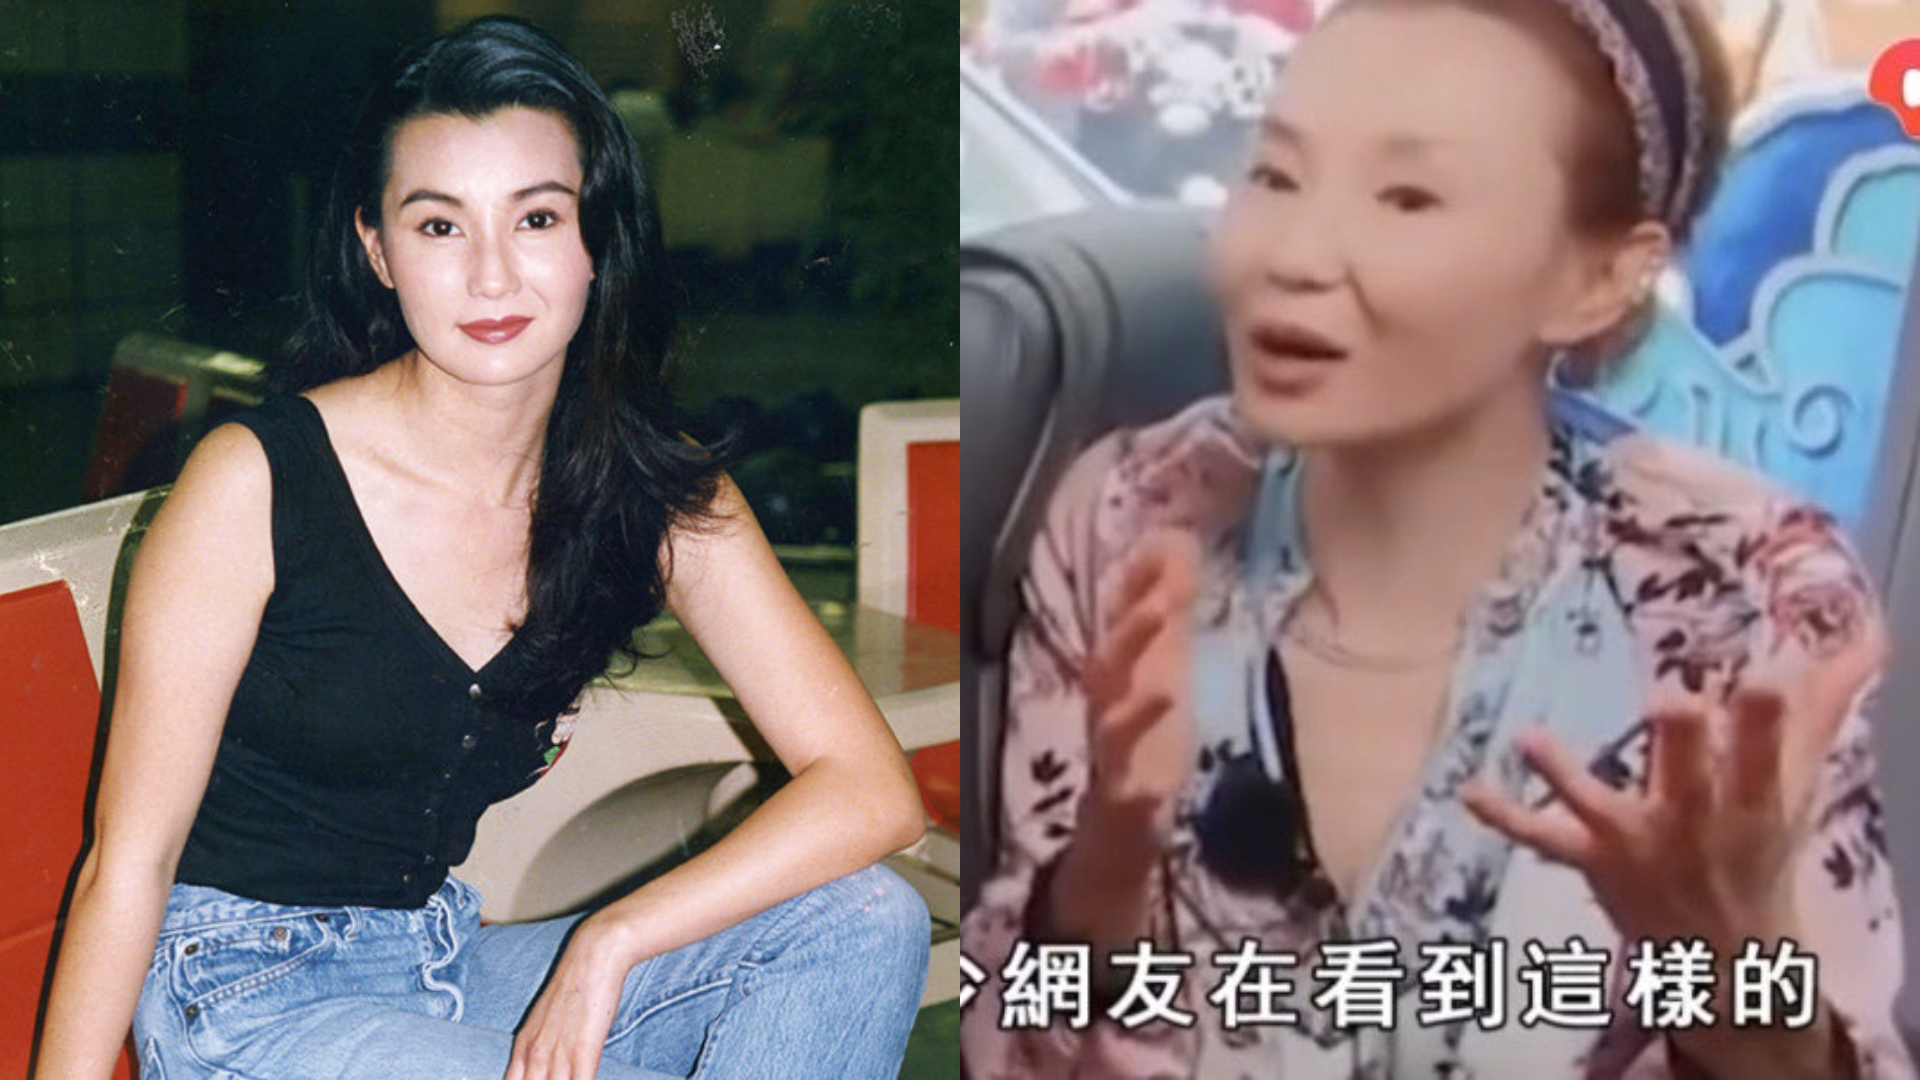 Maggie Cheung Gets Unfairly Slammed By Netizens After Someone Posts This  Photo Of Her - 8Days